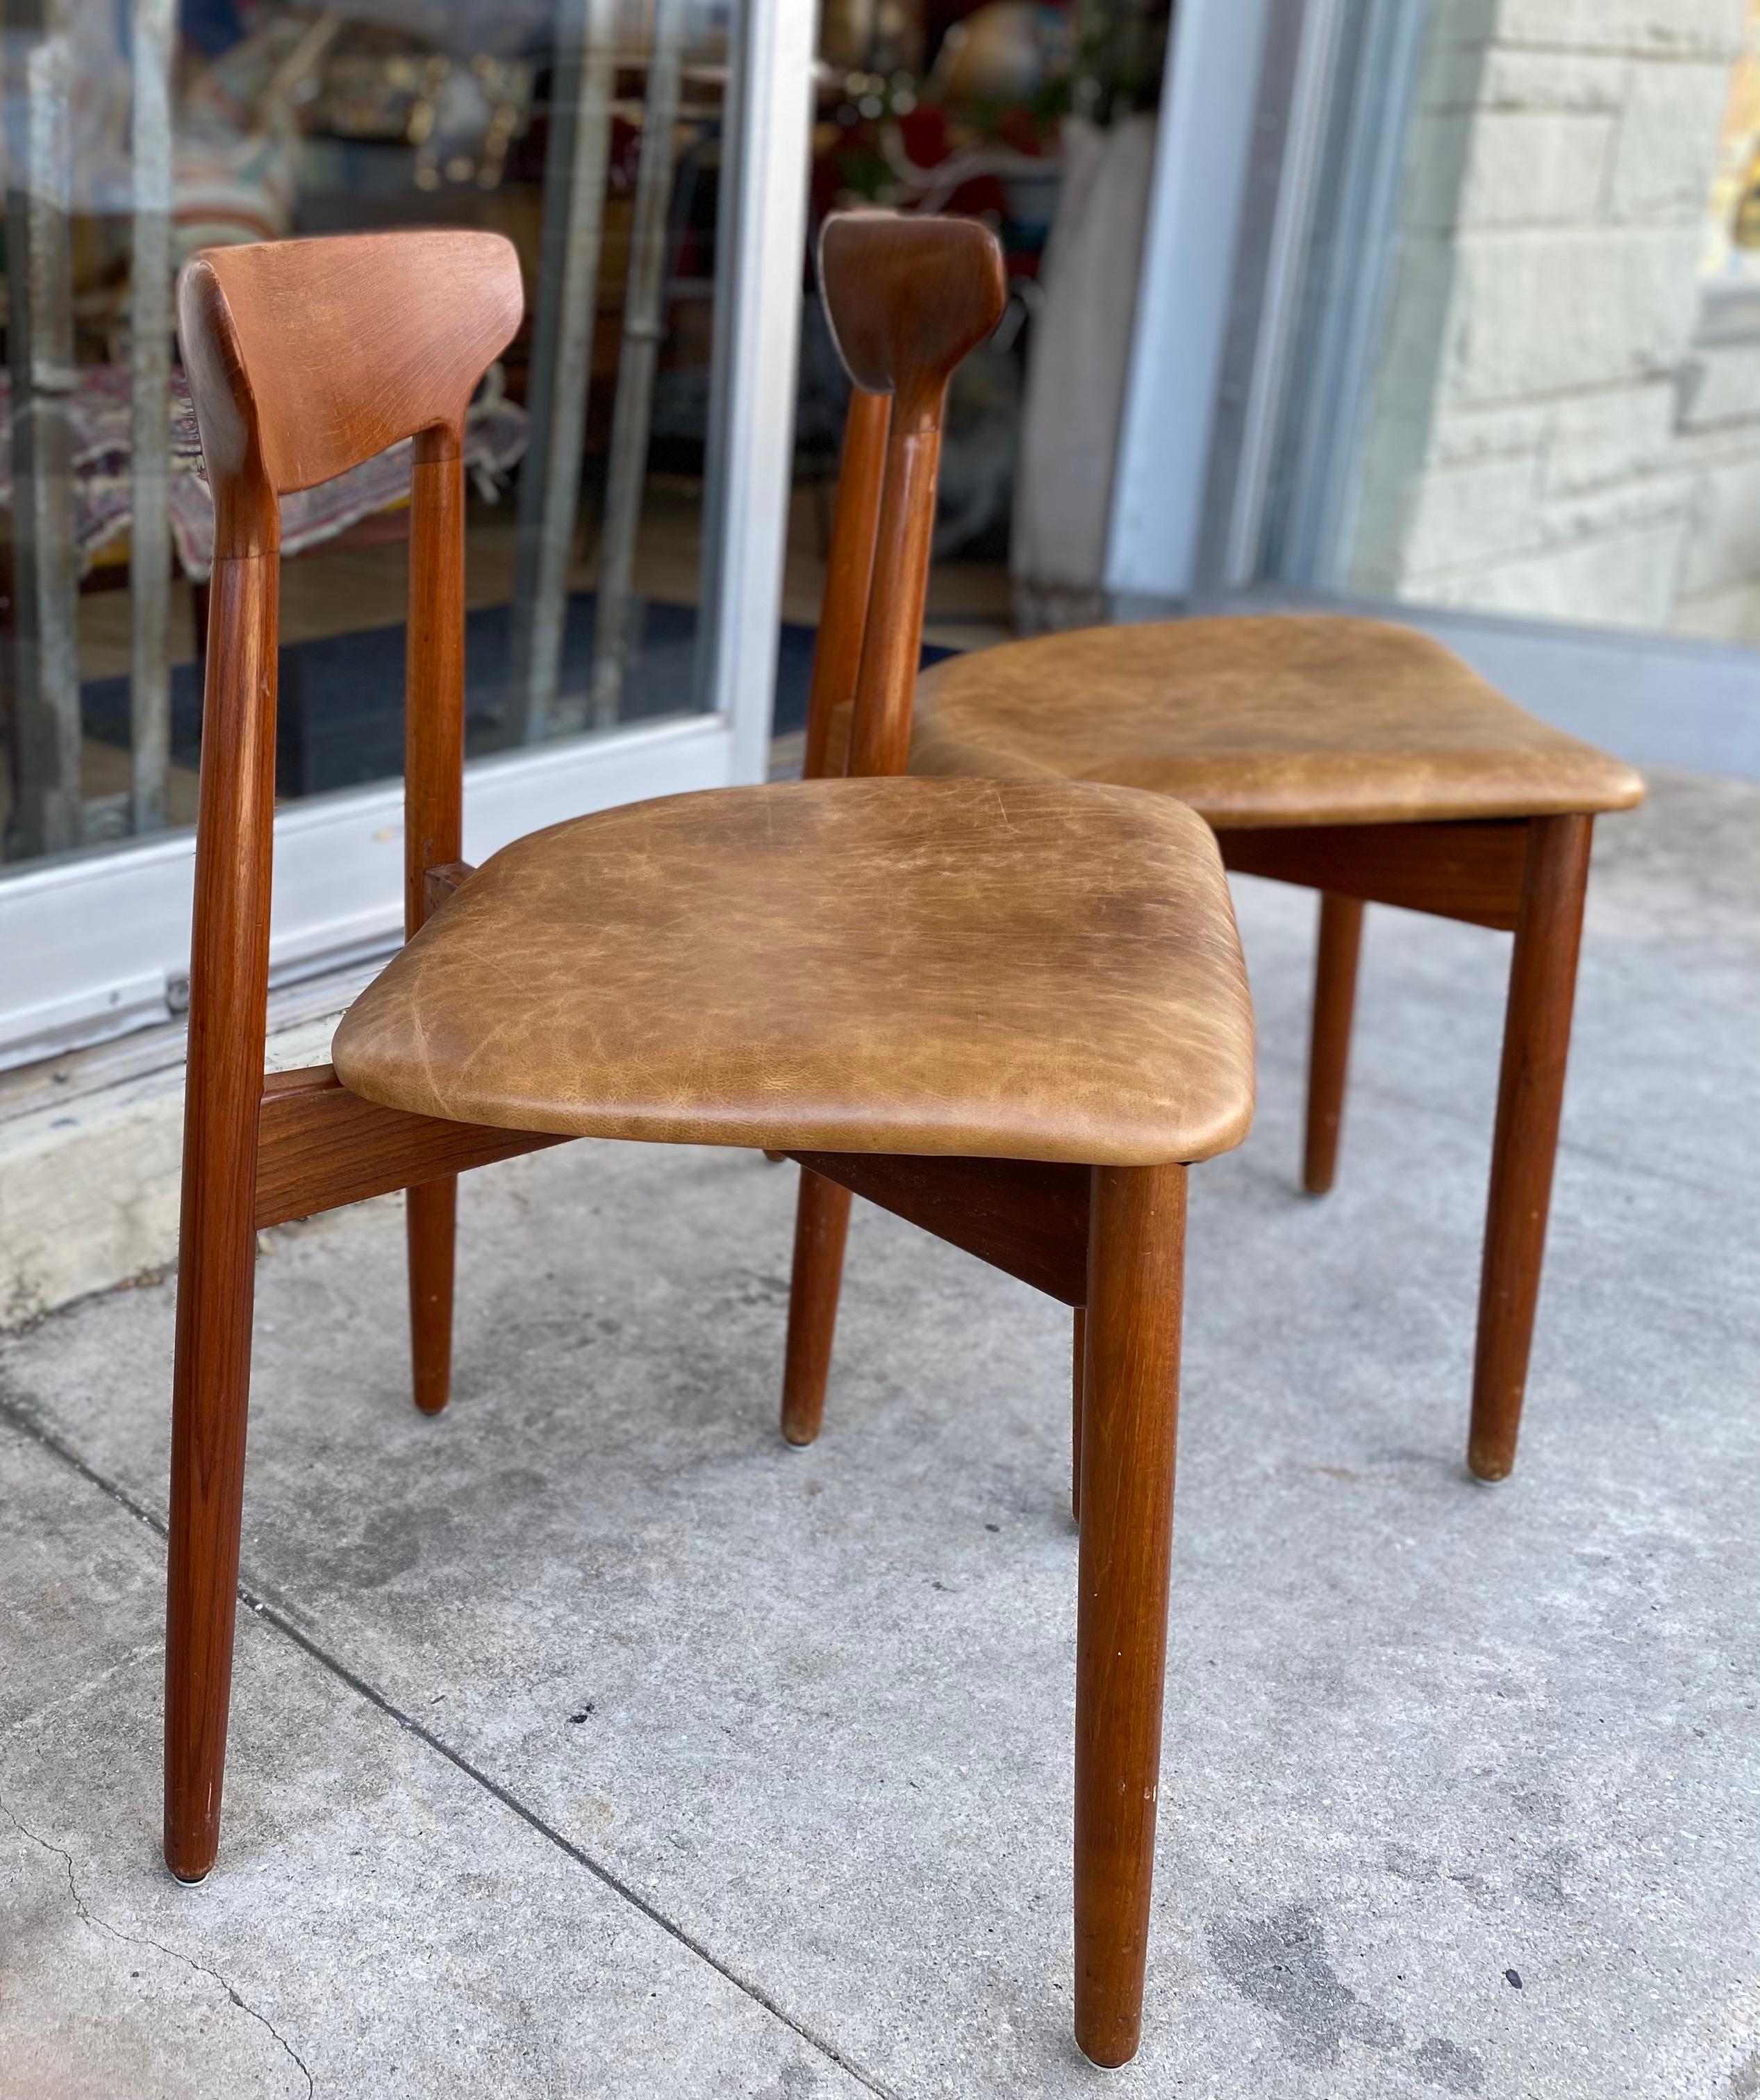 Beautiful set of four Mid-Century Modern Danish dining chairs designed by Harry Østergaard made of teak and tan leather seating, circa 1970s. This set of four danish modern dining chairs are in great overall vintage condition.